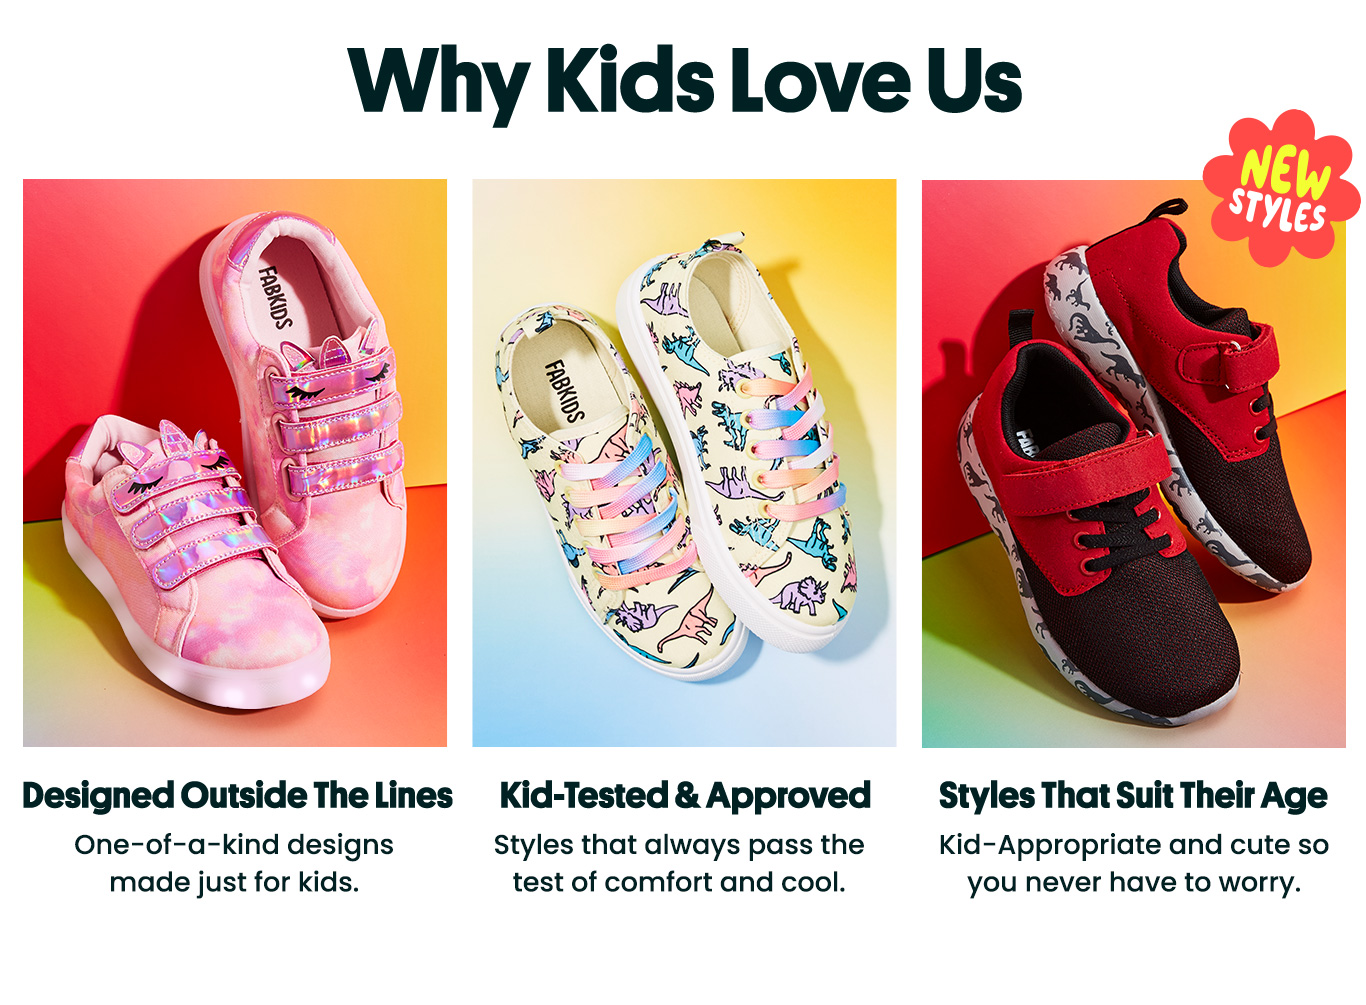 Designed Outside The Lines, Kid-Tested & Approved, Styles That Suit Their Age